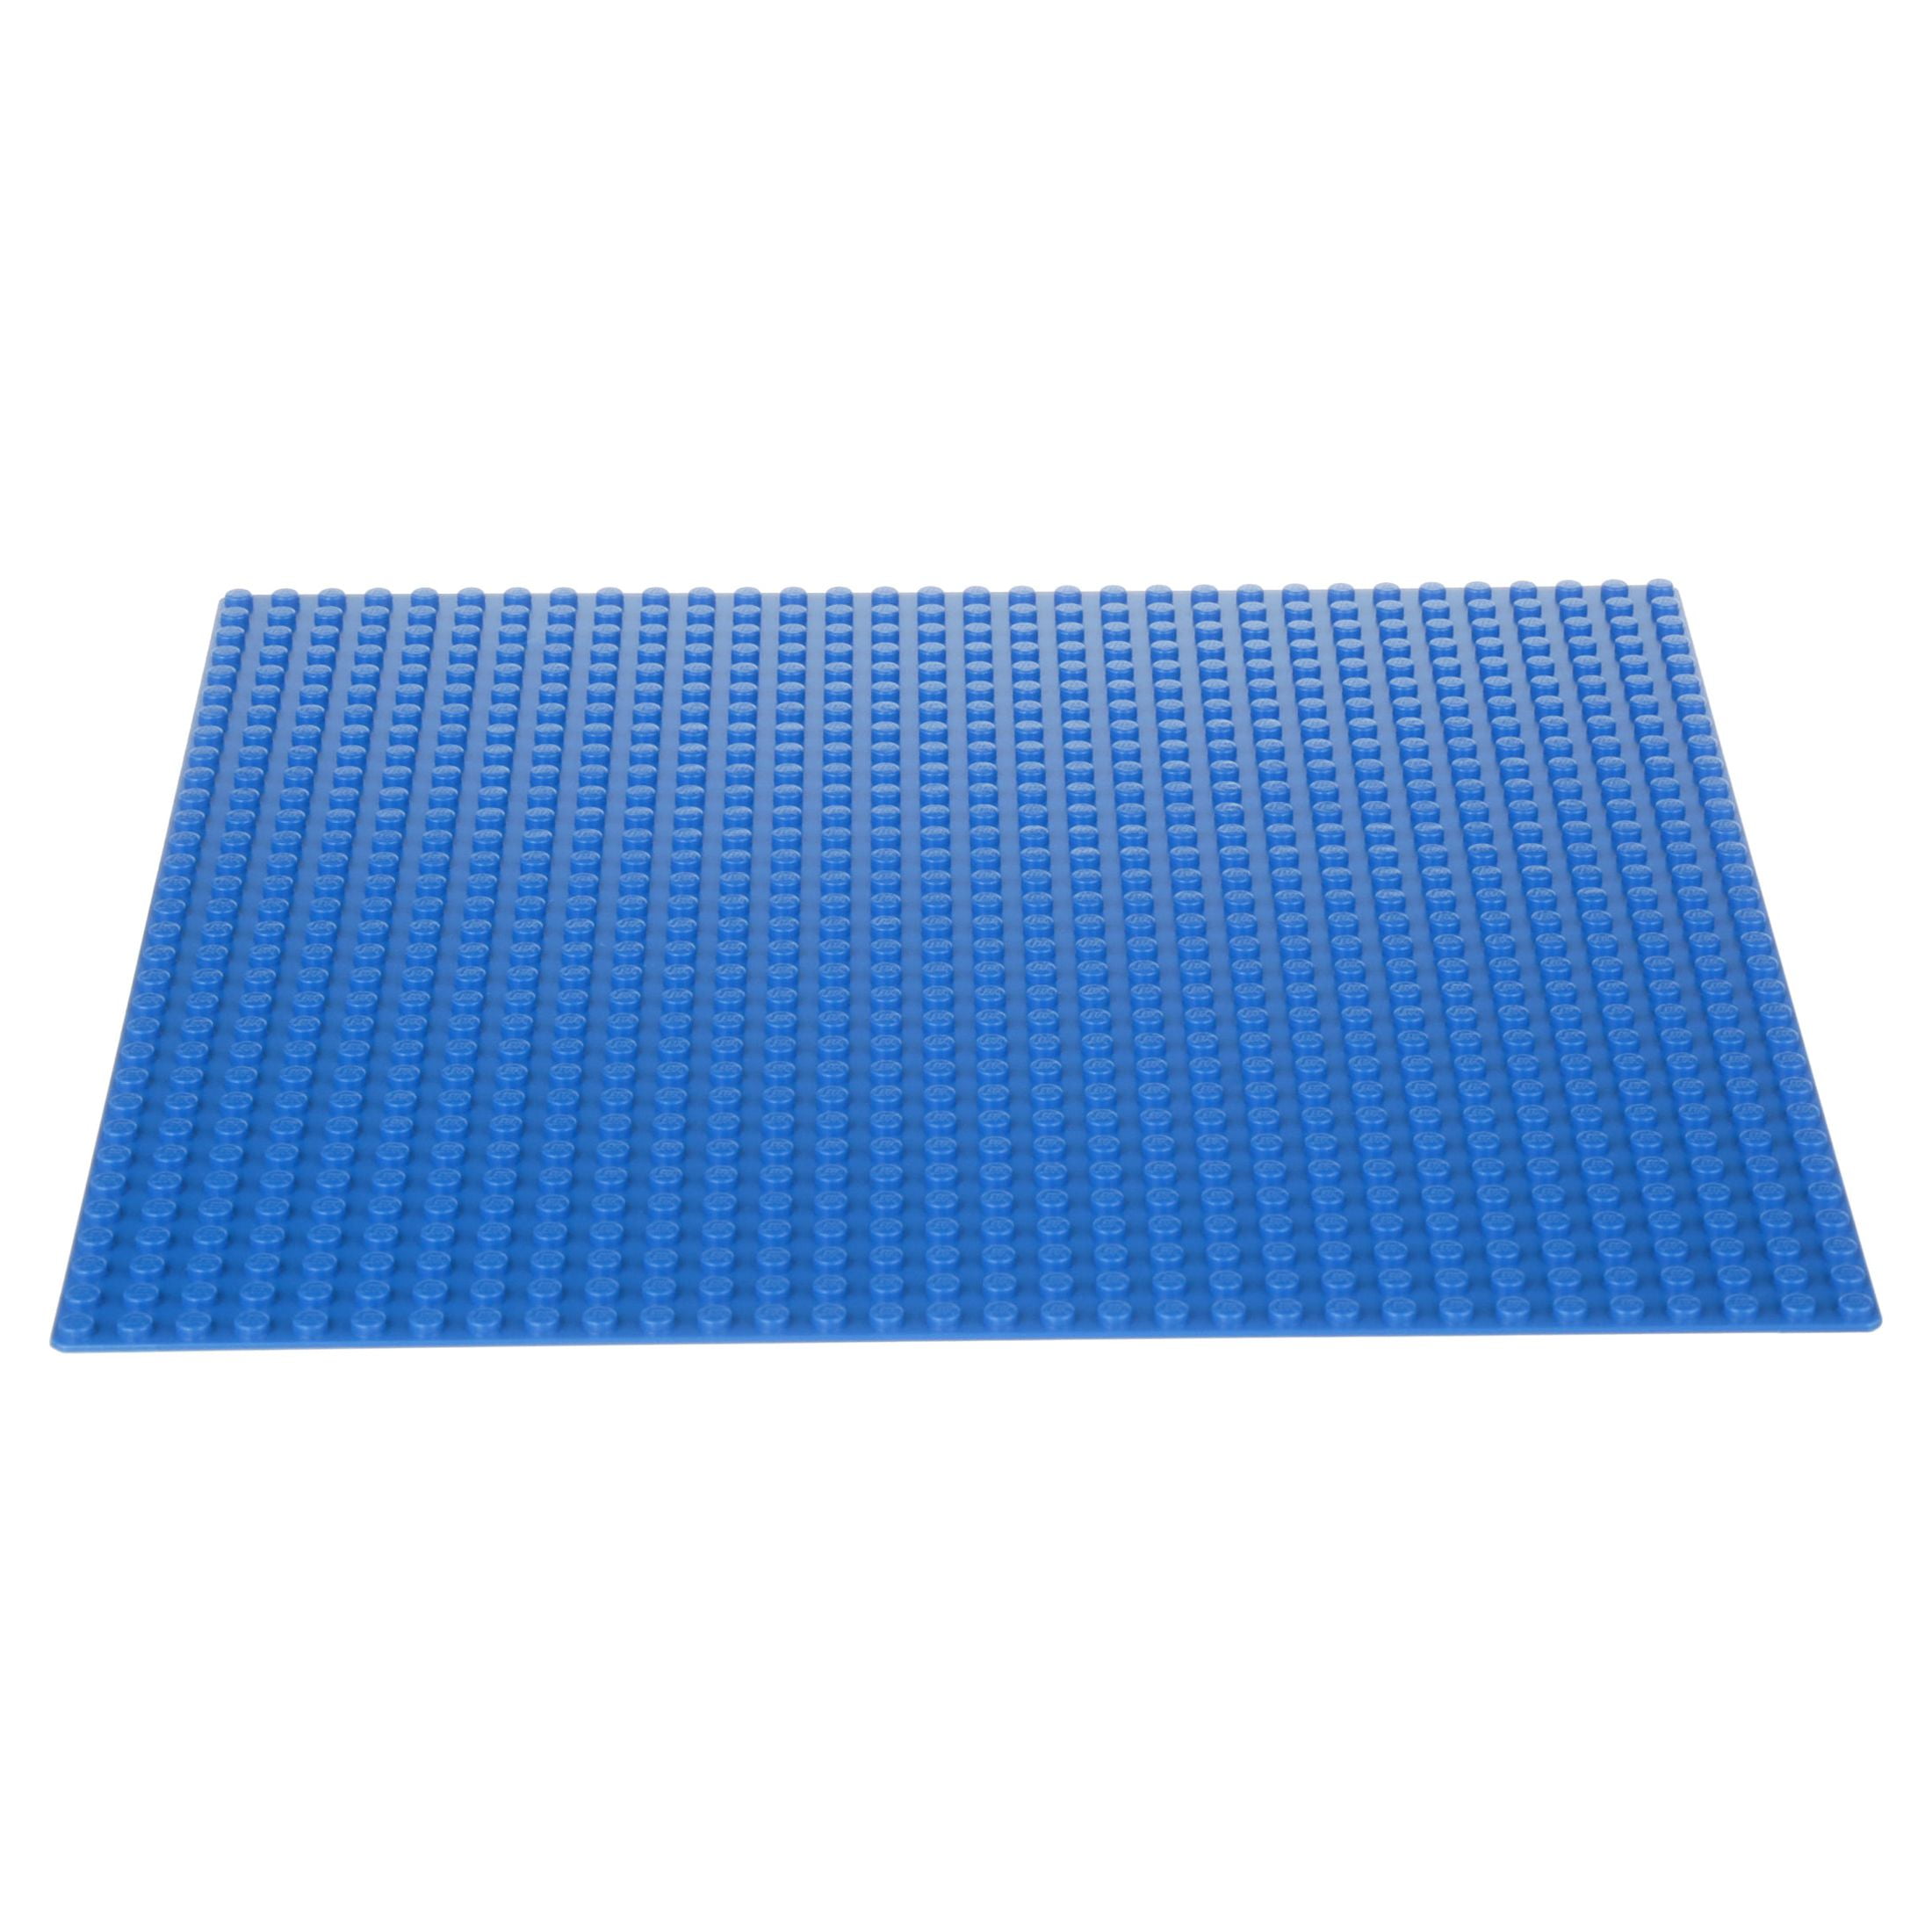 LEGO Classic Blue Baseplate 10714 Popular Toy Building Accessory